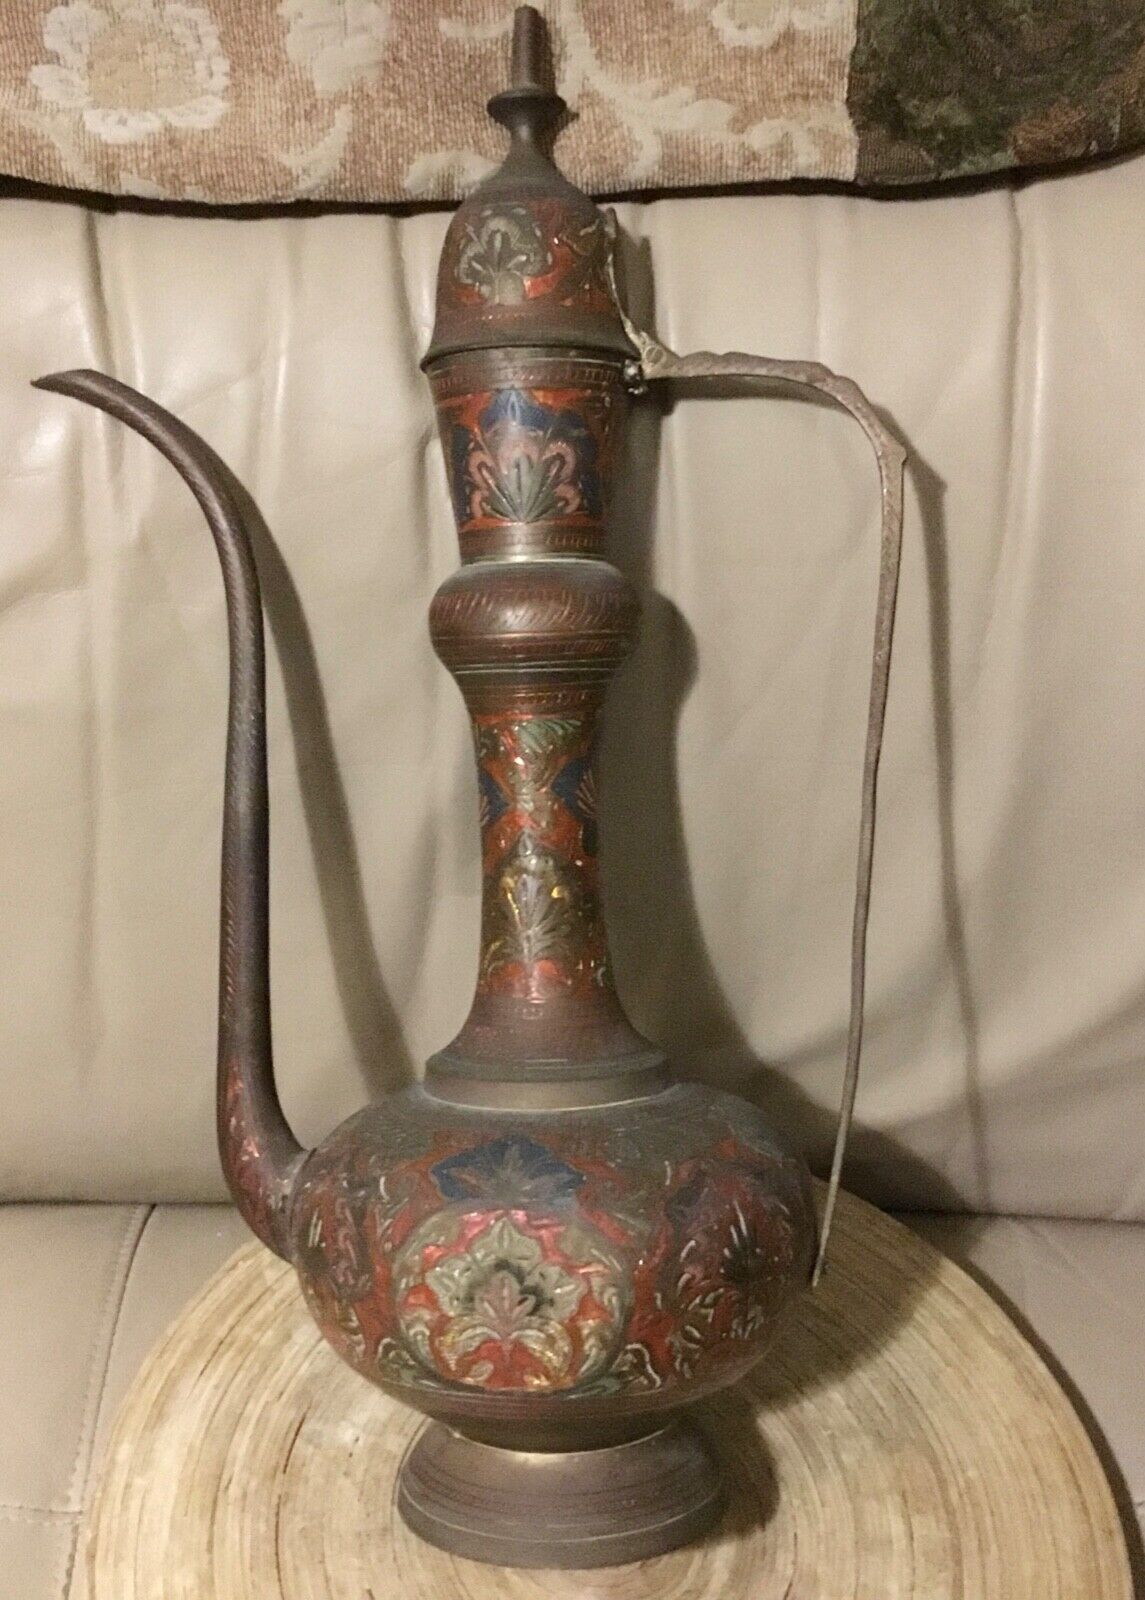 AGED BRASS COFFEE TEA WATER POT MIDDLE EASTERN ARABIC ISLAMIC COLORFULLY ETCHED